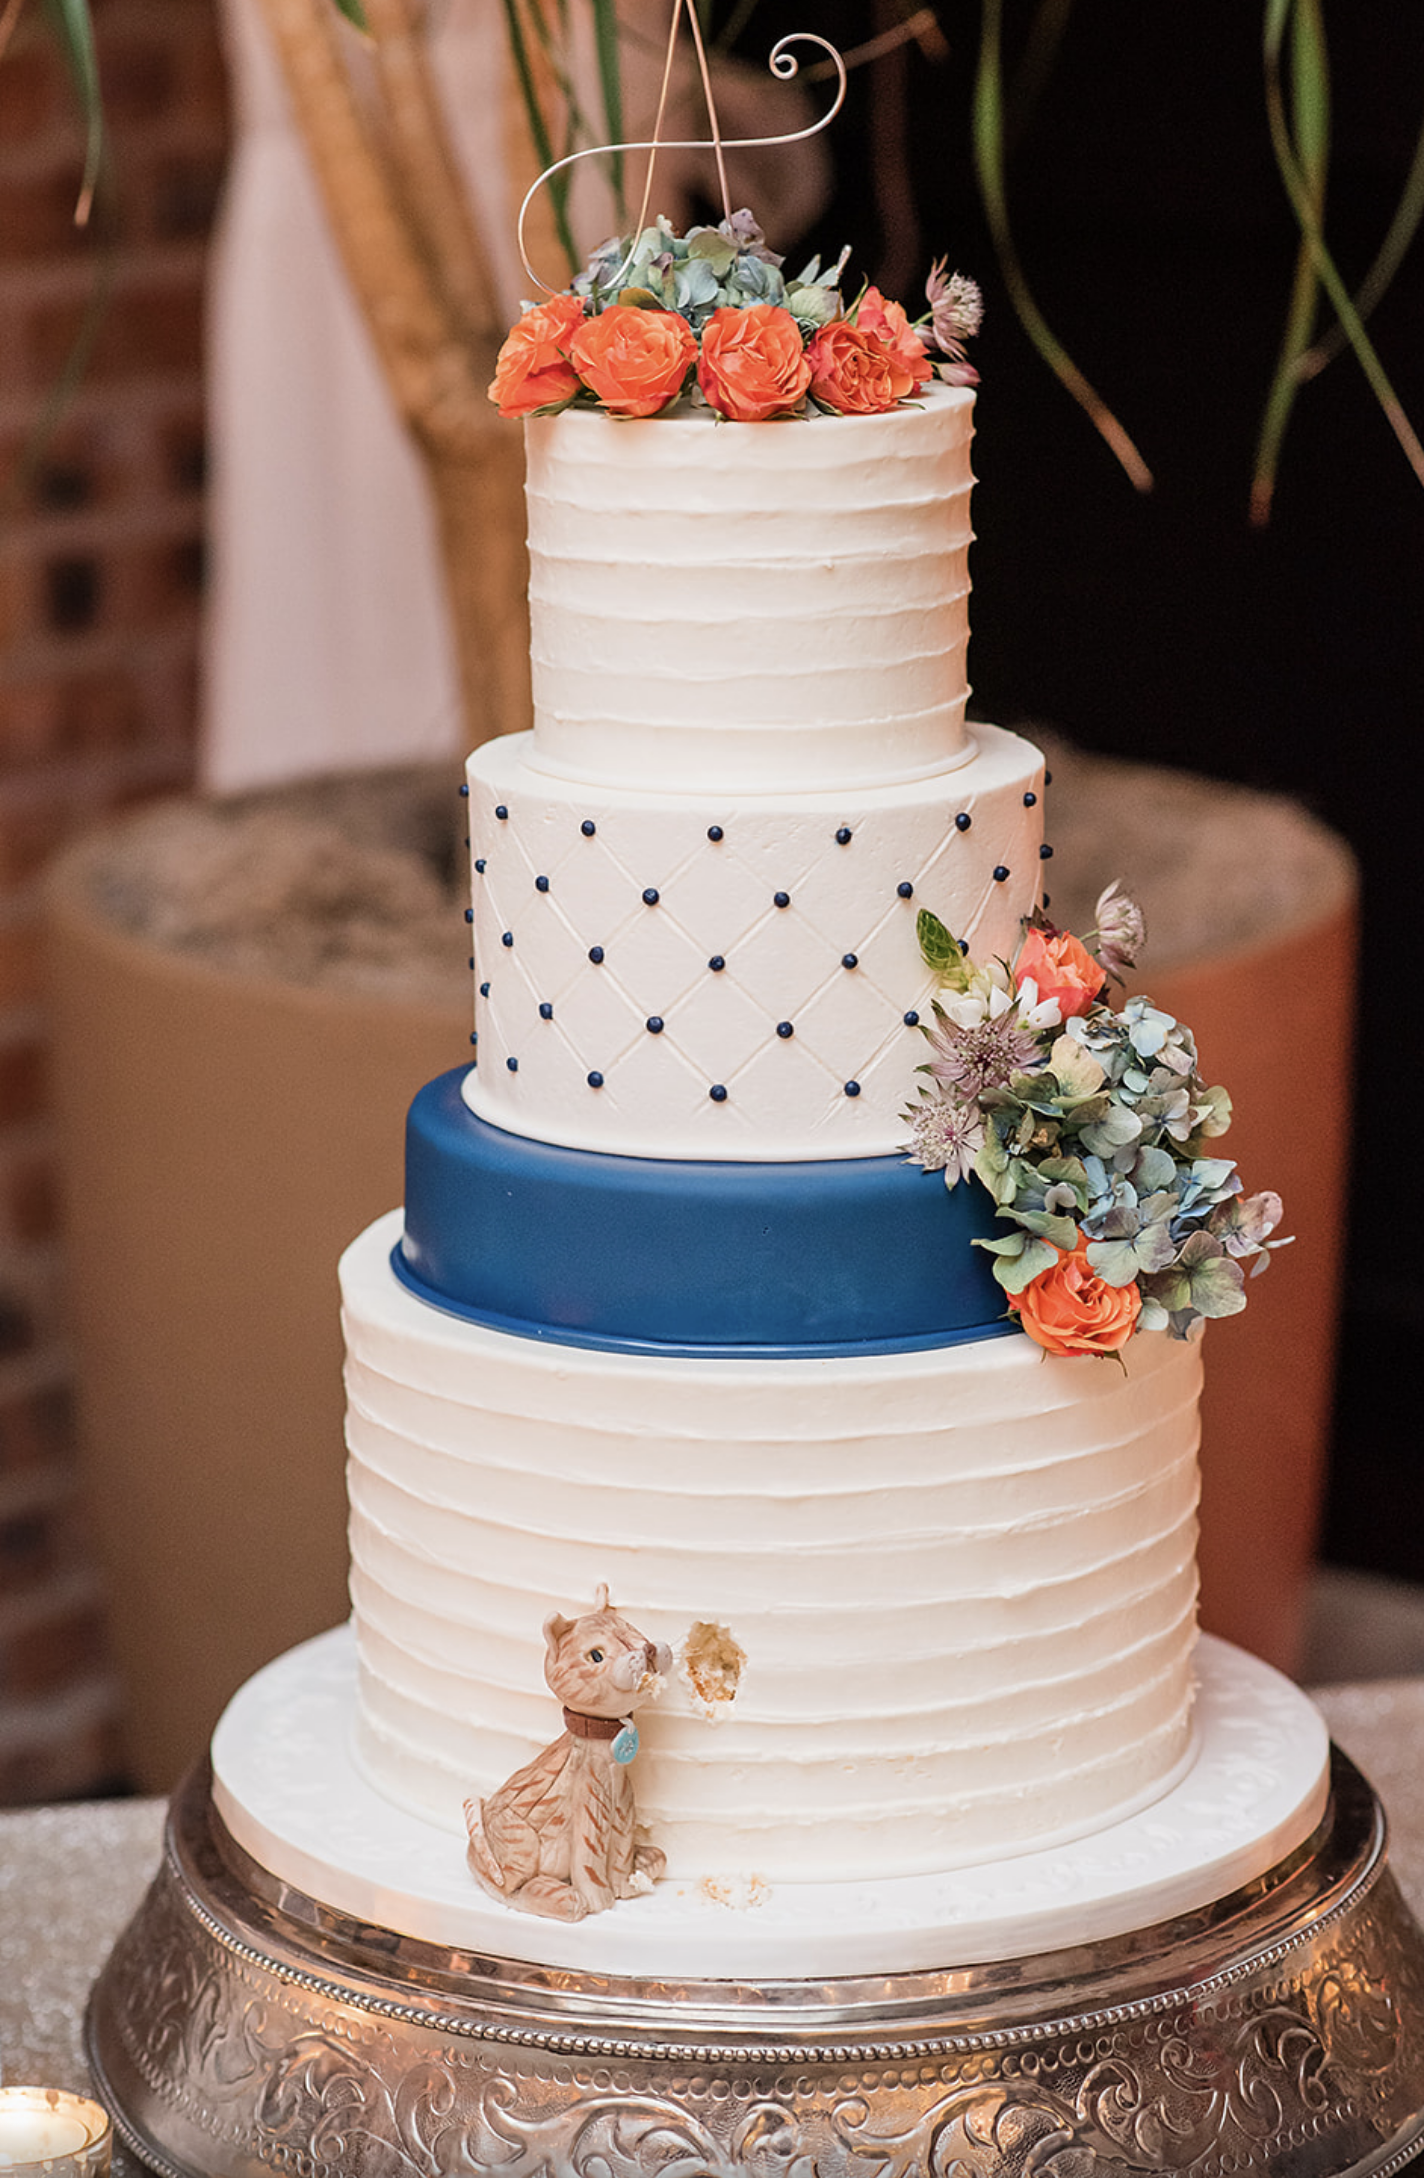 Amy and Jonathan's wedding cake with a mini cat figure placed on the side of it.